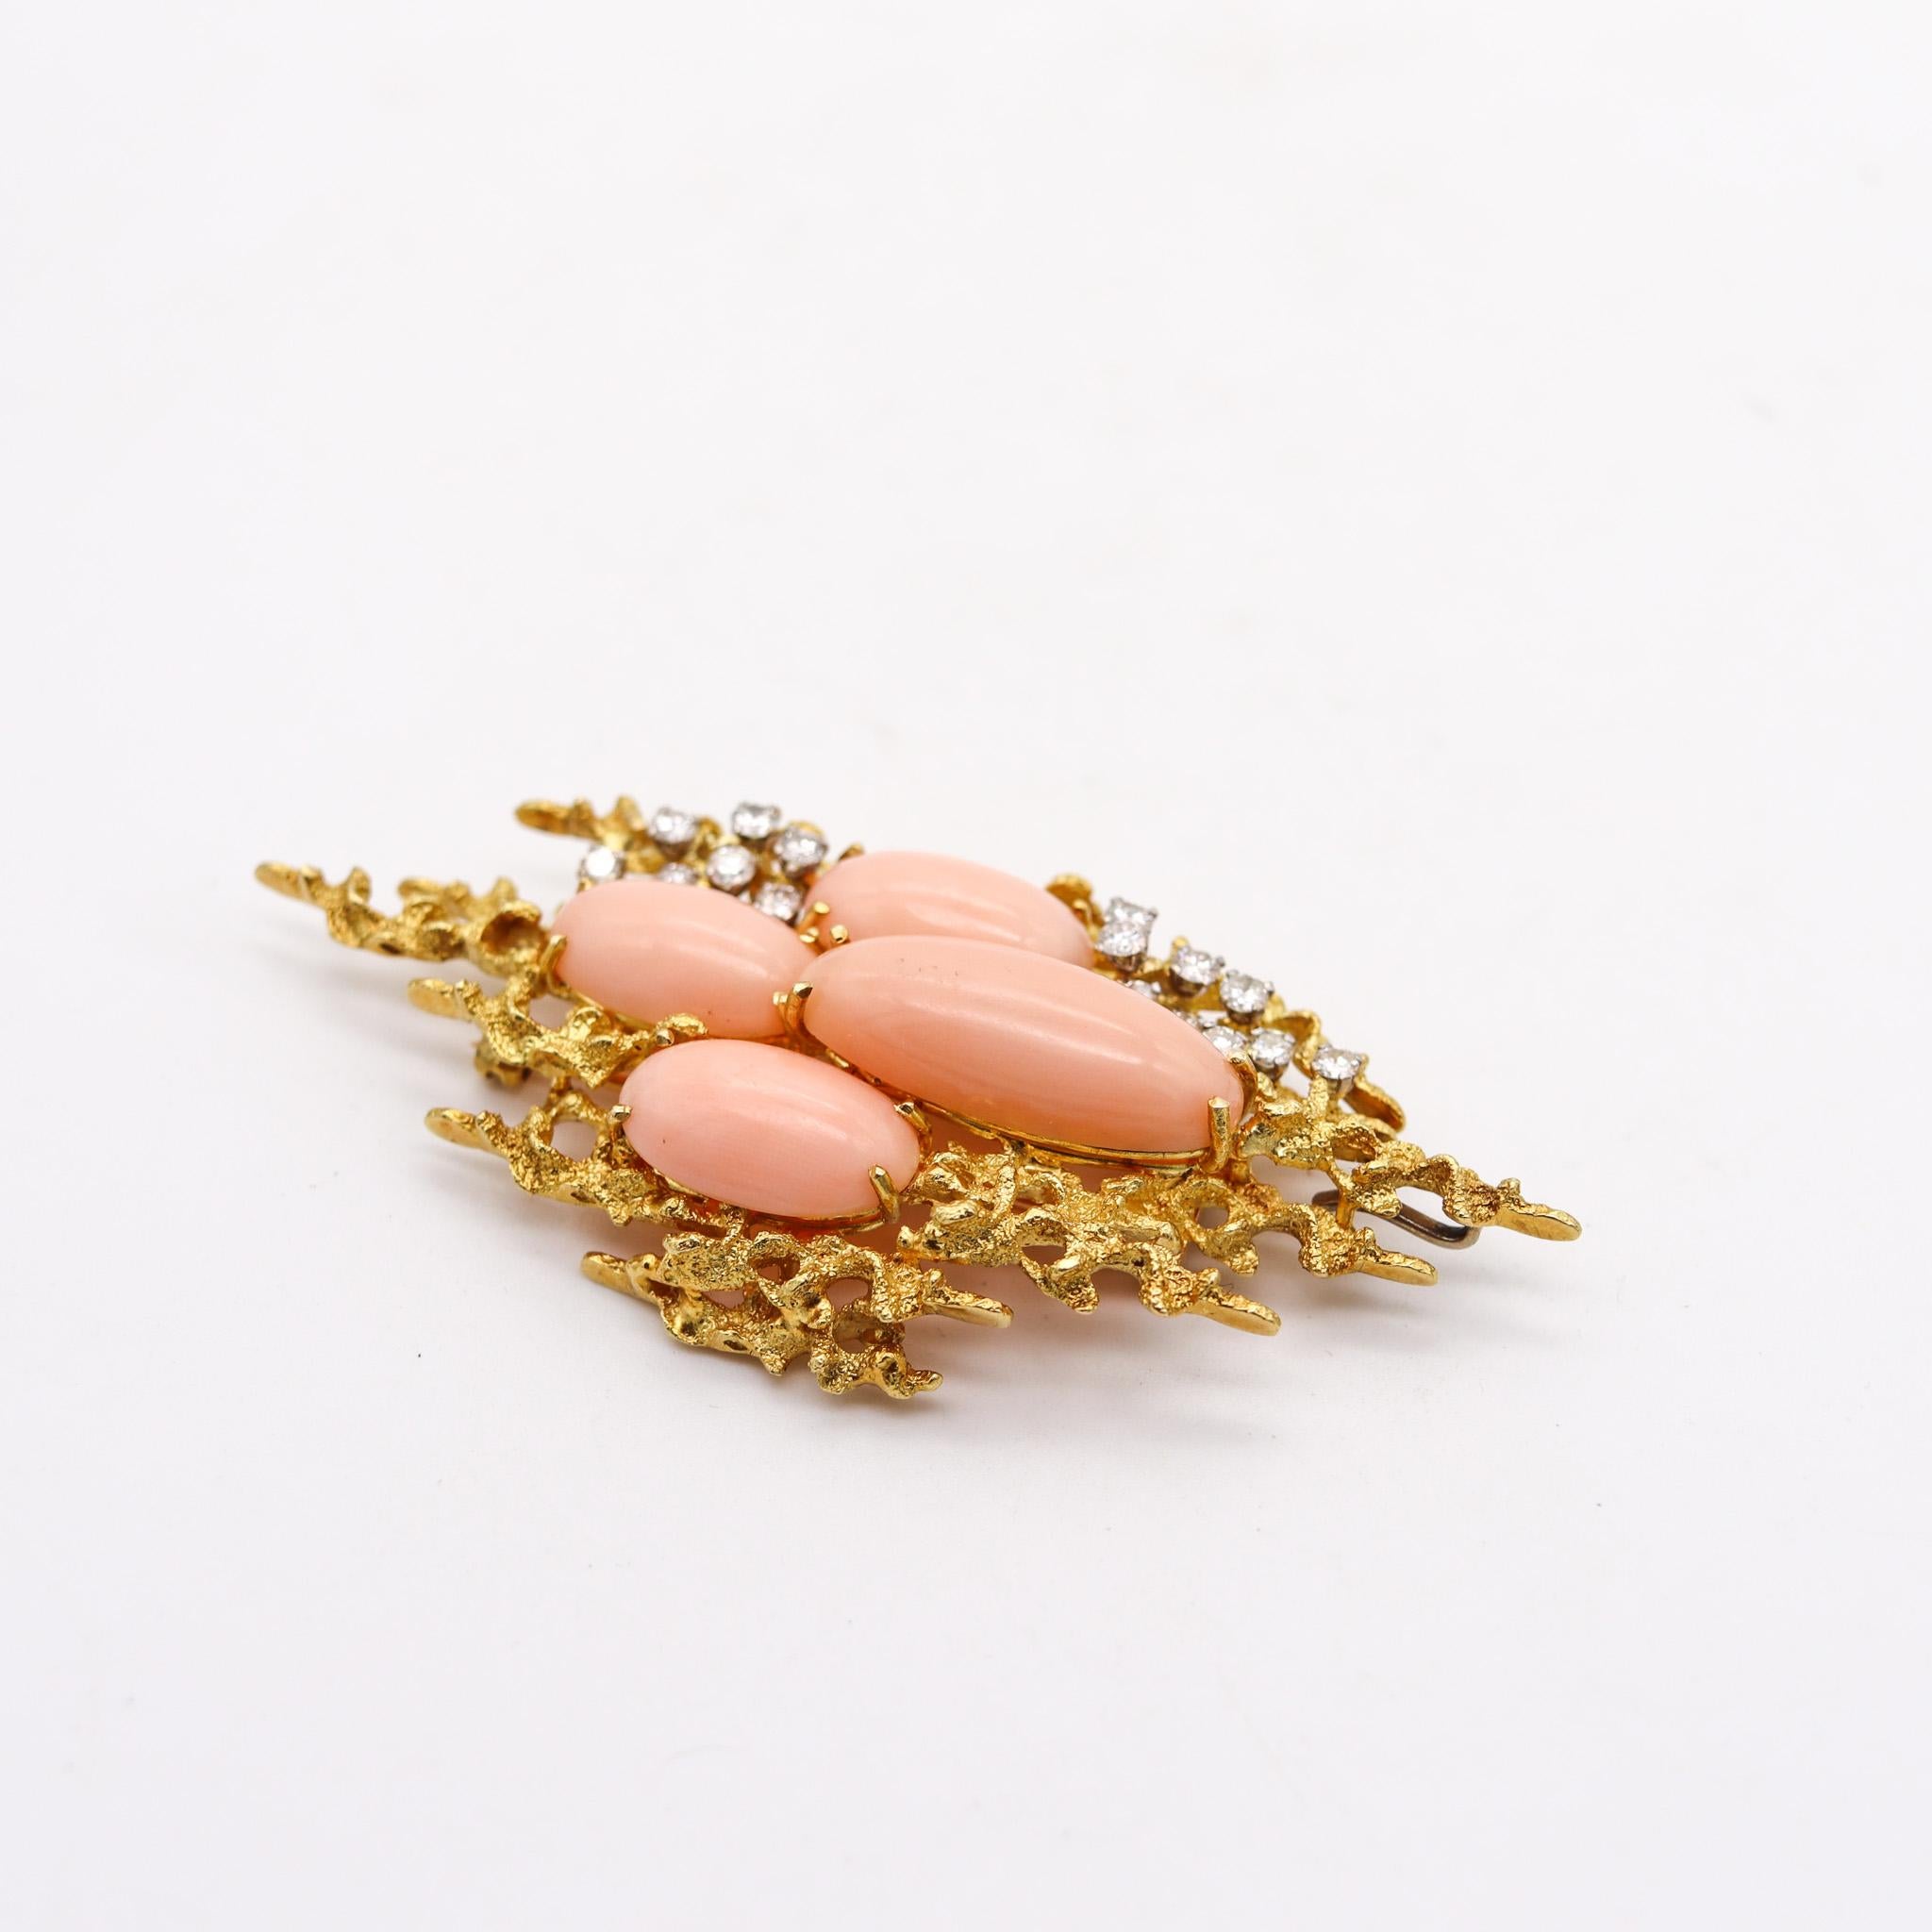 Modernist George Weil 1960 Brutalist Pendant Brooch In 18Kt Gold Diamonds And Corals For Sale